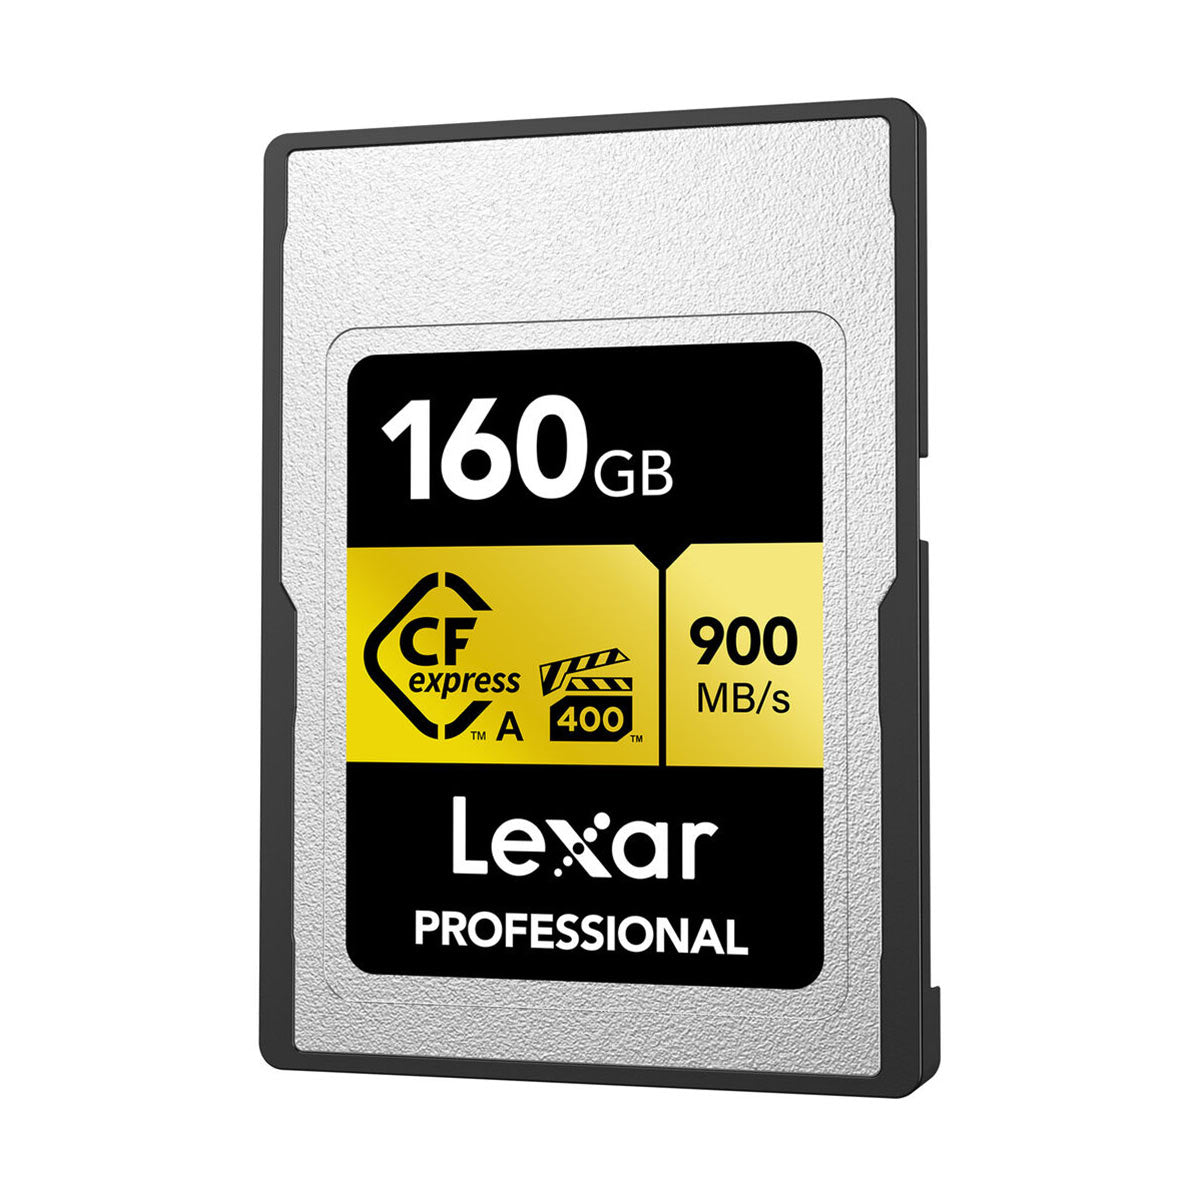 Lexar 160GB Professional CFexpress Type A Memory Card (Gold Series) (VPG 400)